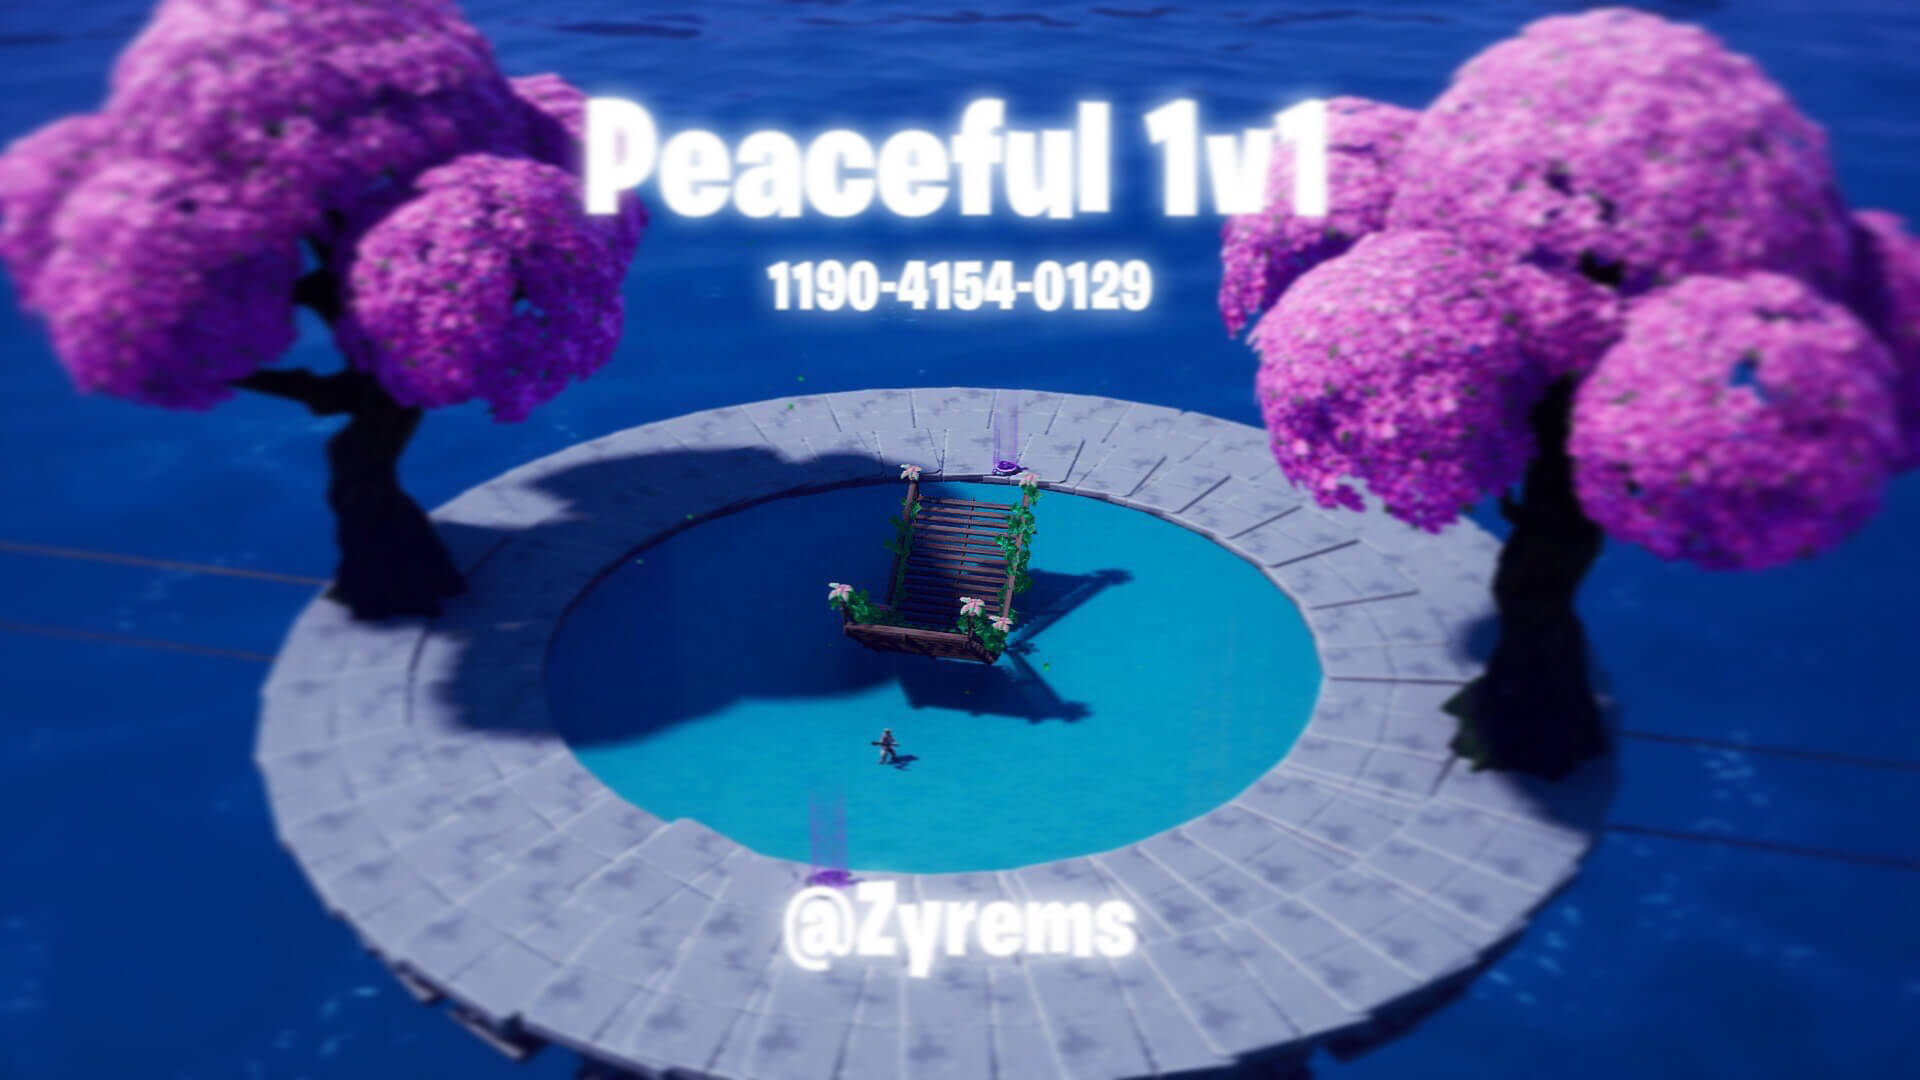 PEACEFUL 1V1 BY @ZYREMS